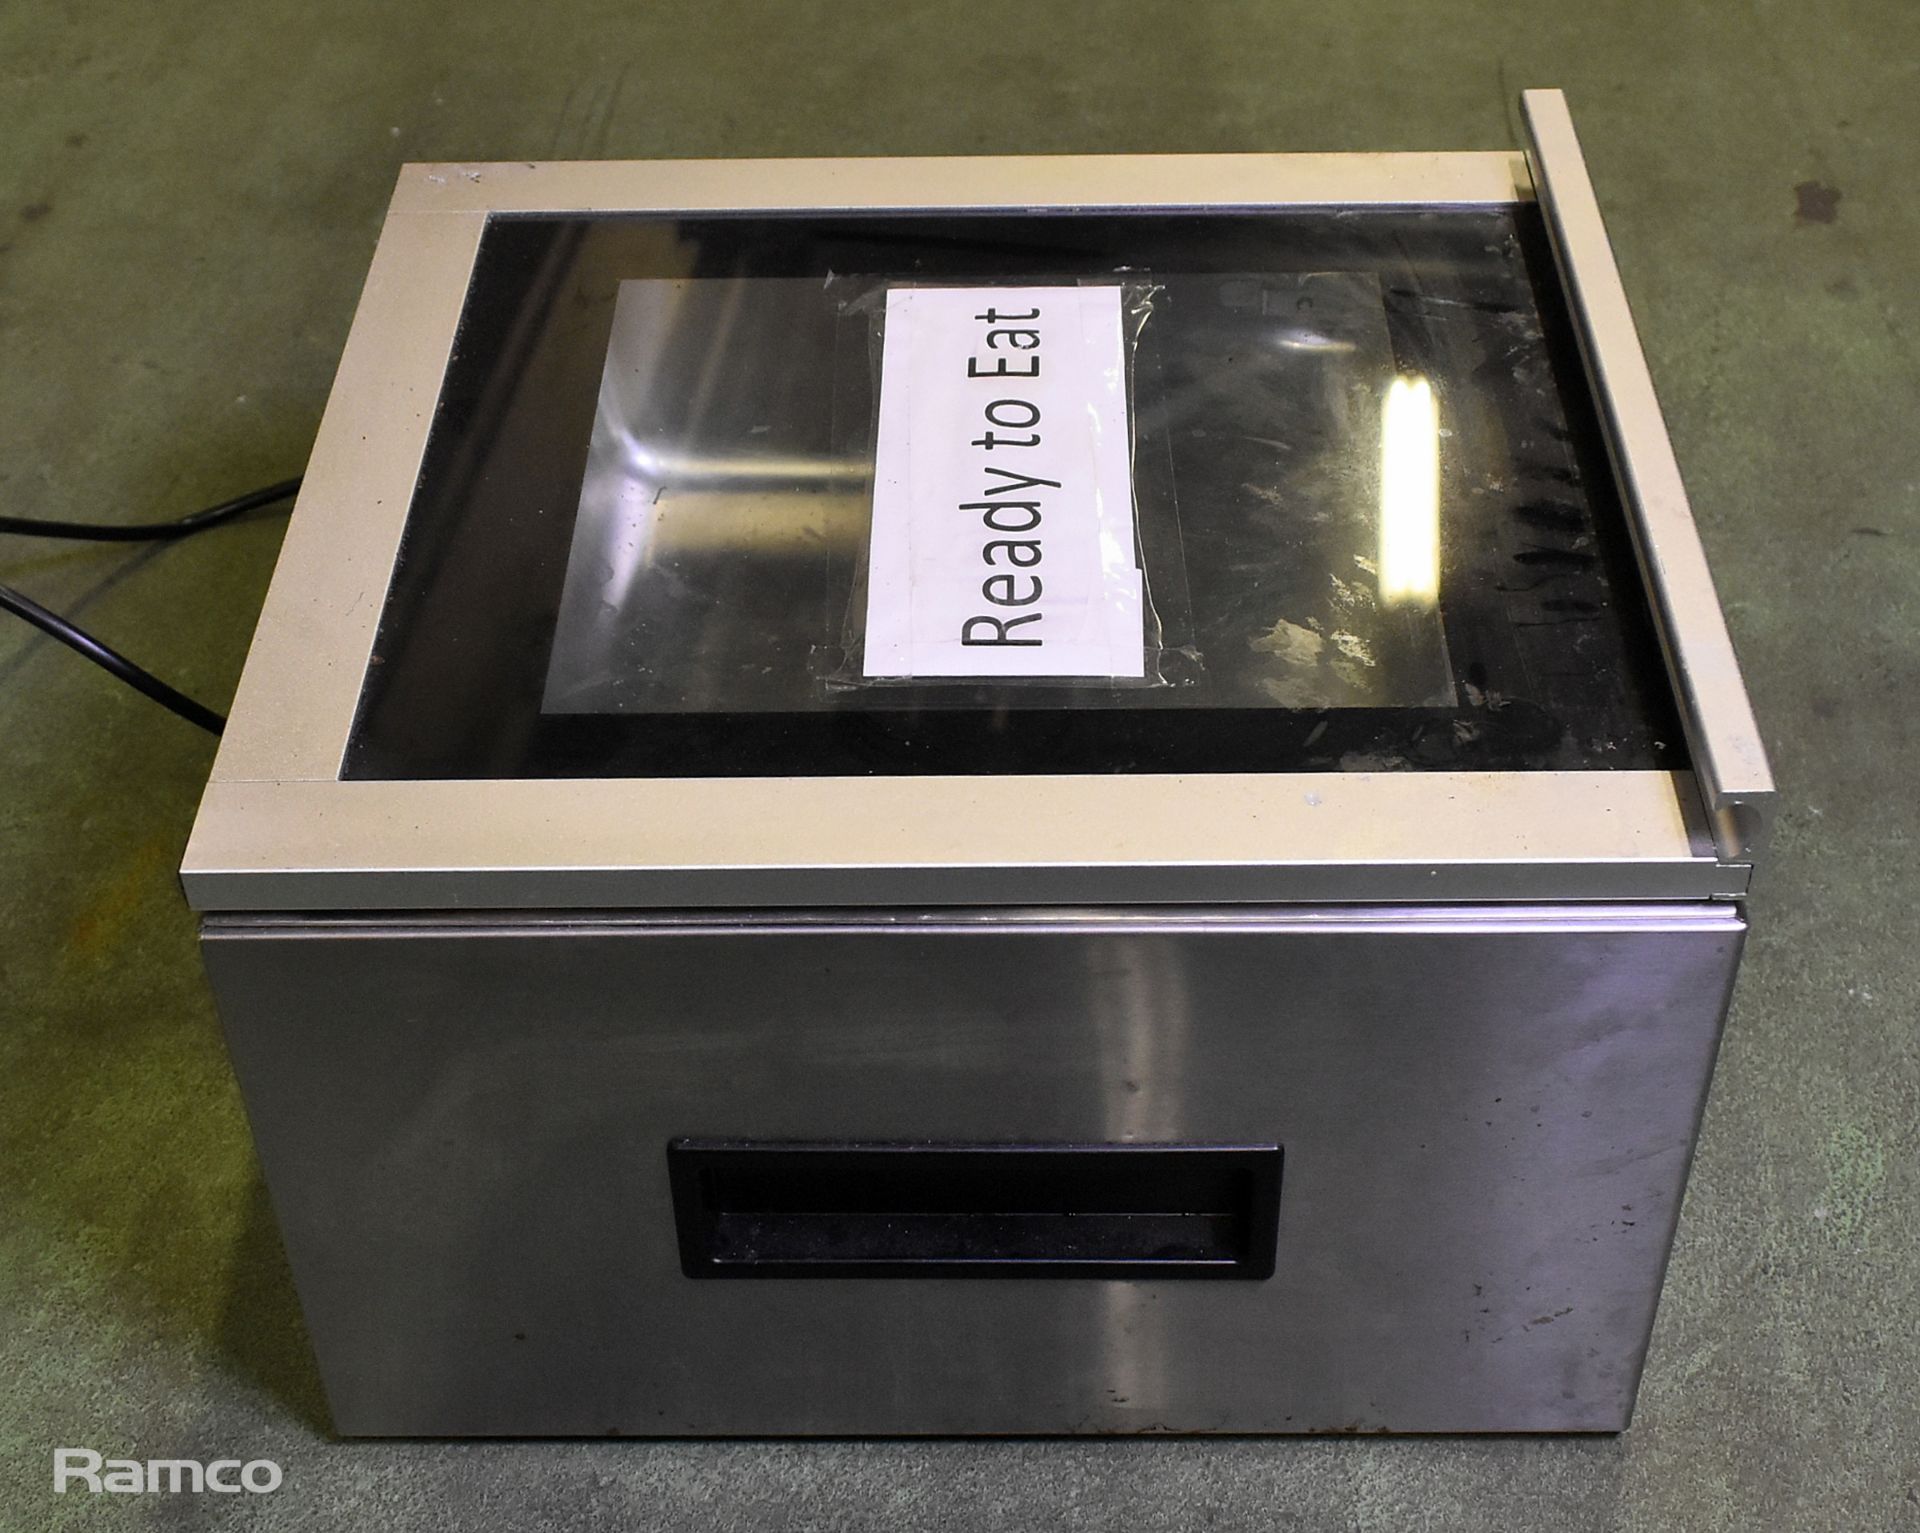 Buffalo CT014 stainless steel digital chamber vacuum pack machine - W 370 x D 420 x H 220mm - Image 5 of 8